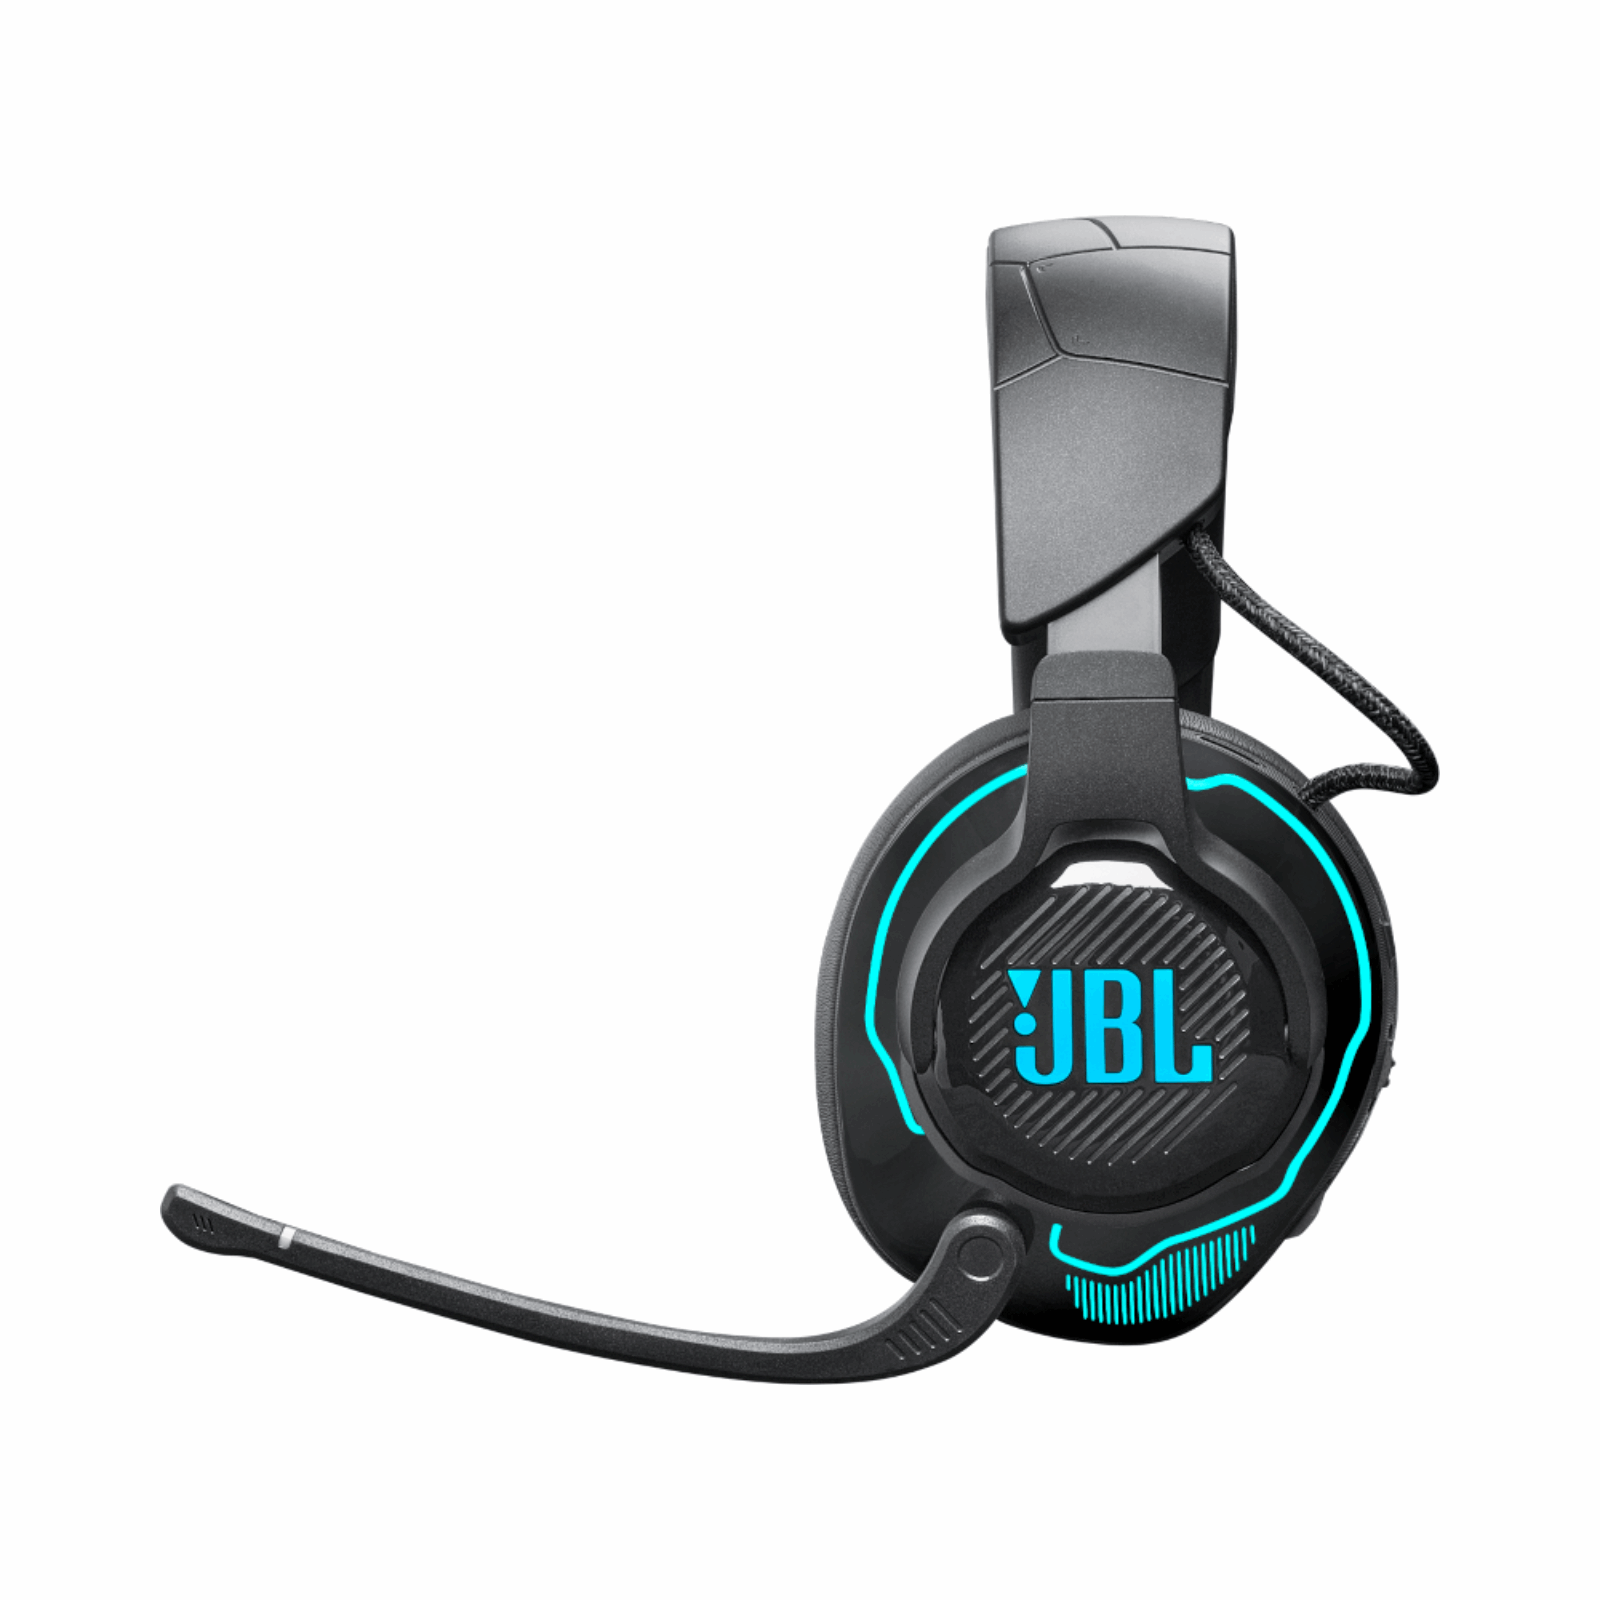 JBL QUANTUM 910 Wireless over-ear performance gaming headset with head tracking-enhanced, Active Noise Cancelling and Bluetooth